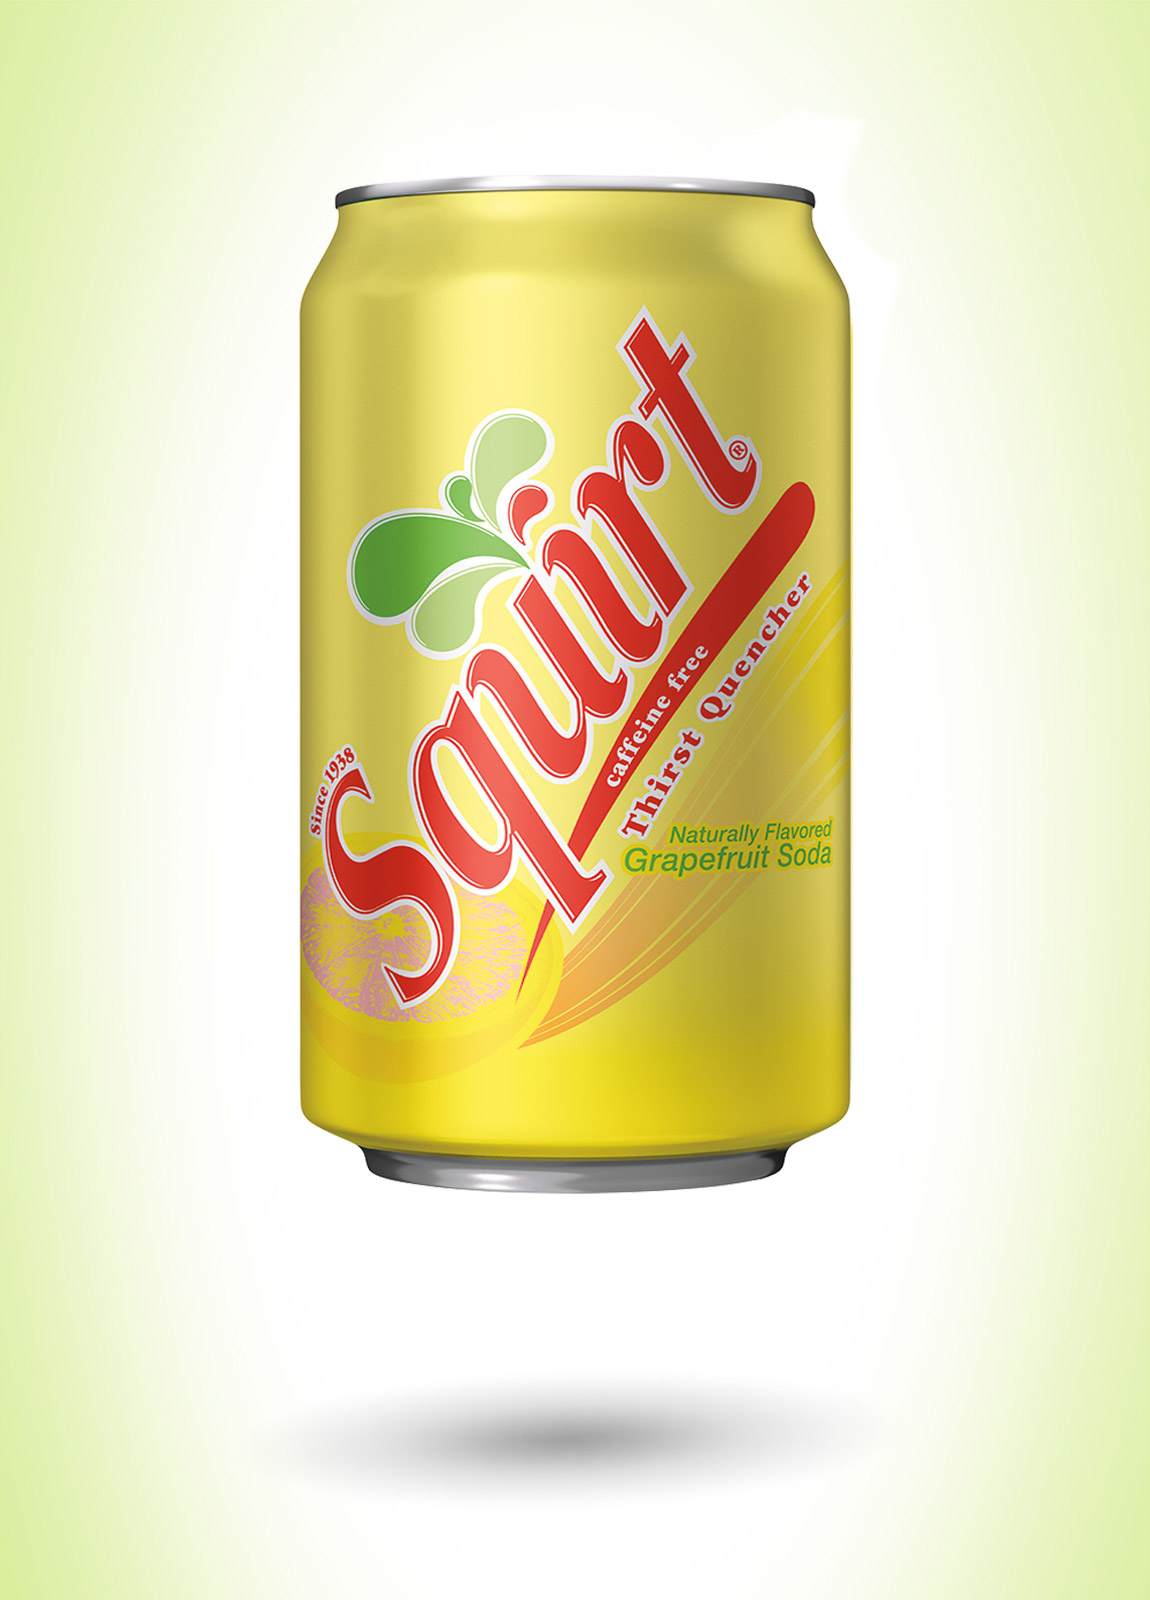 Squirt Soda has been refreshing thirsty Americans since 1938